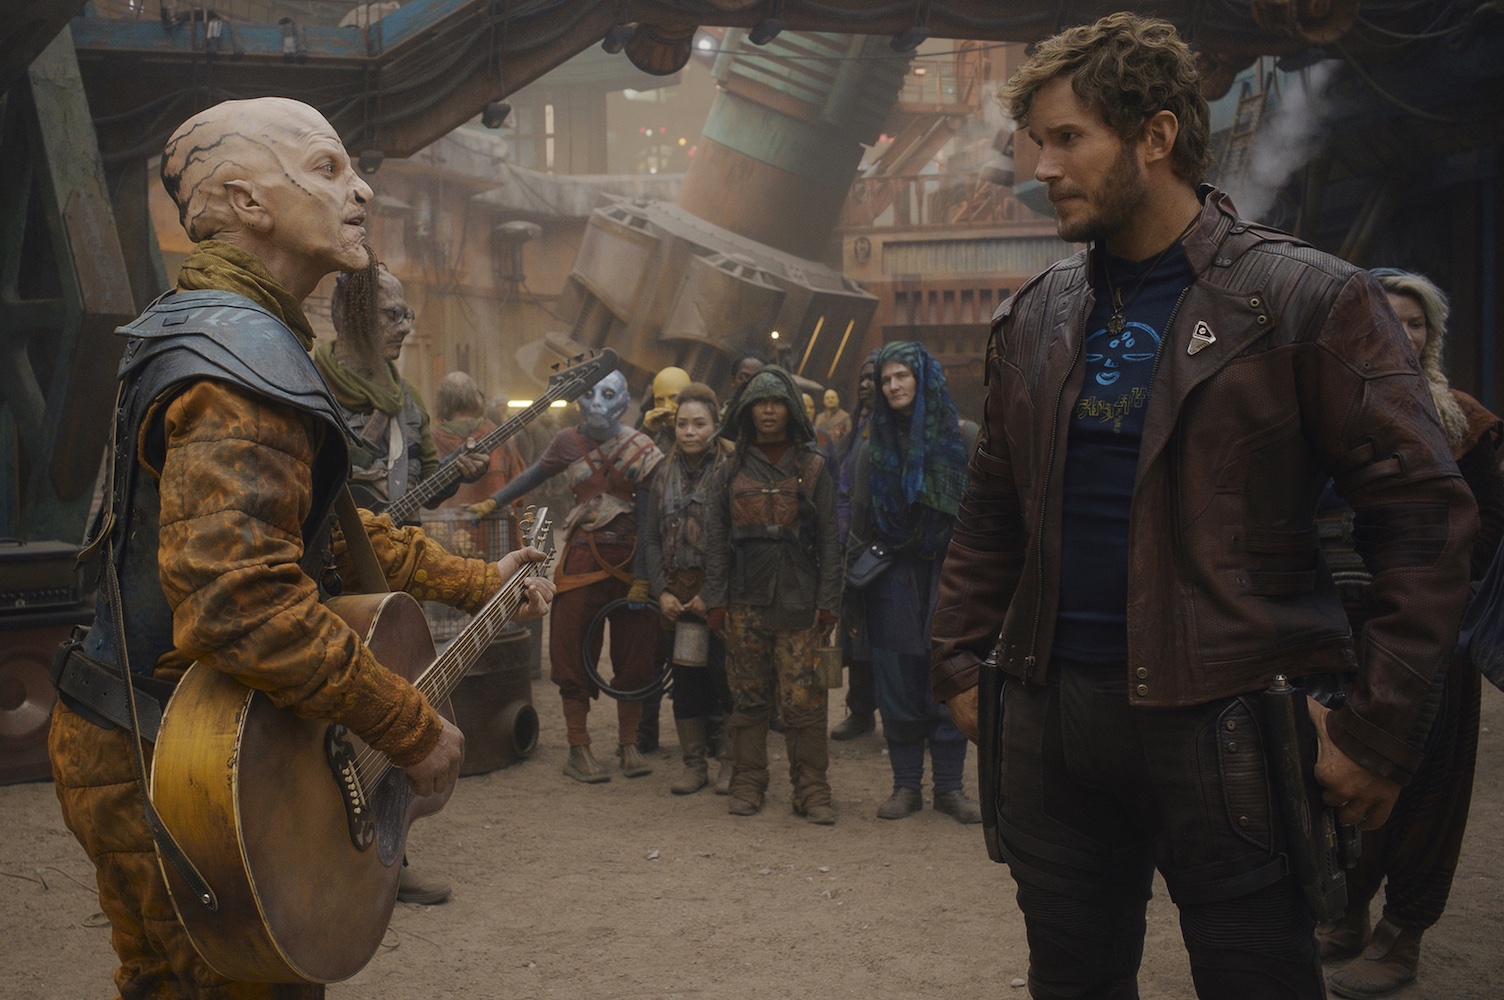 A member of The Old 97’s and Chris Pratt as Peter Quill/Star-Lord in Marvel Studios' The Guardians of the Galaxy: Holiday Special, exclusively on Disney+. Photo by Jessica Miglio. © 2022 MARVEL